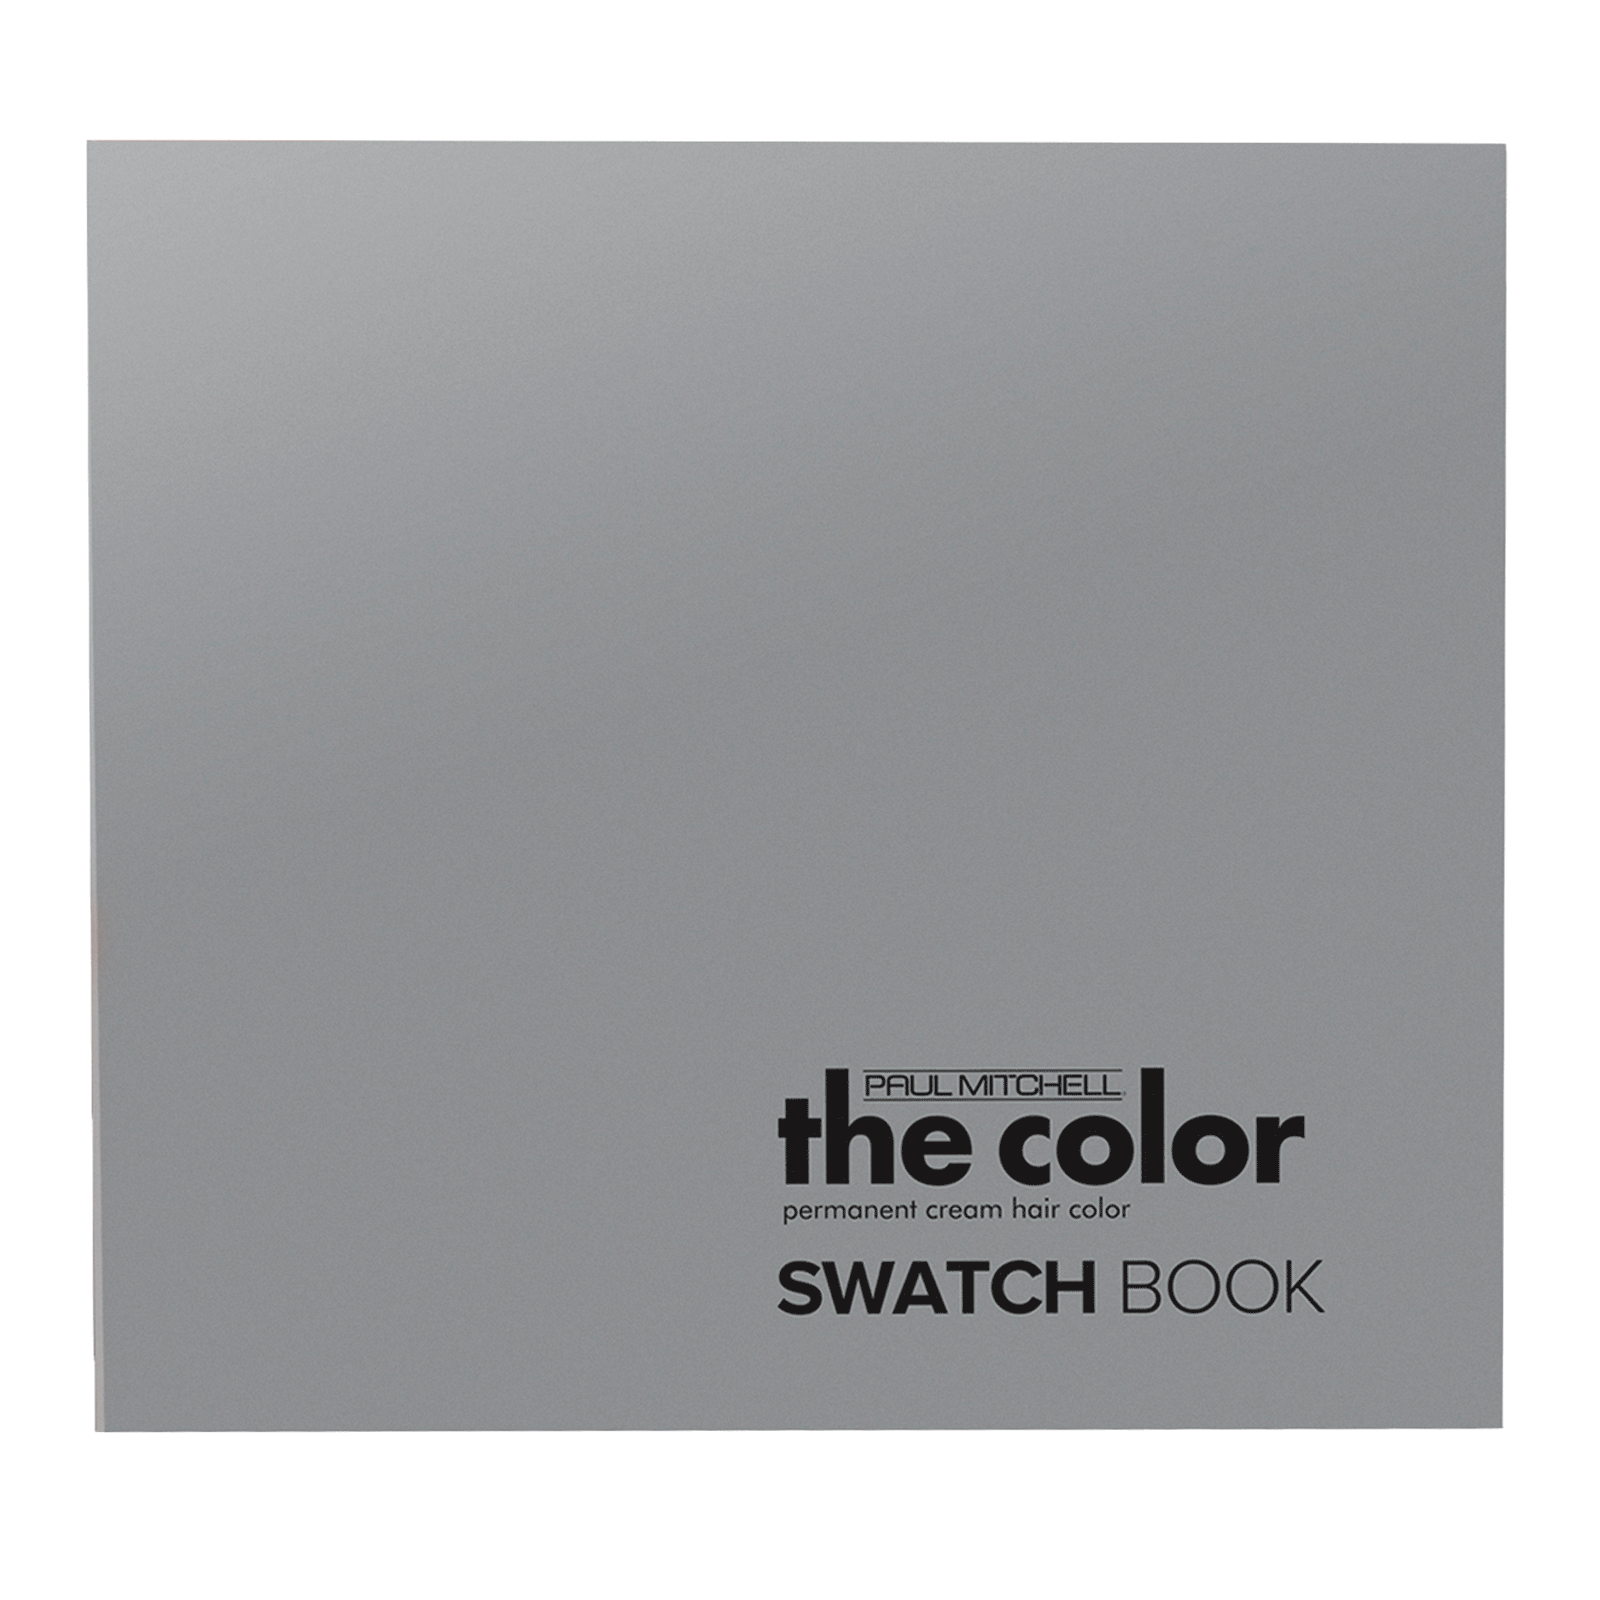 How To Make A Color Swatch Book